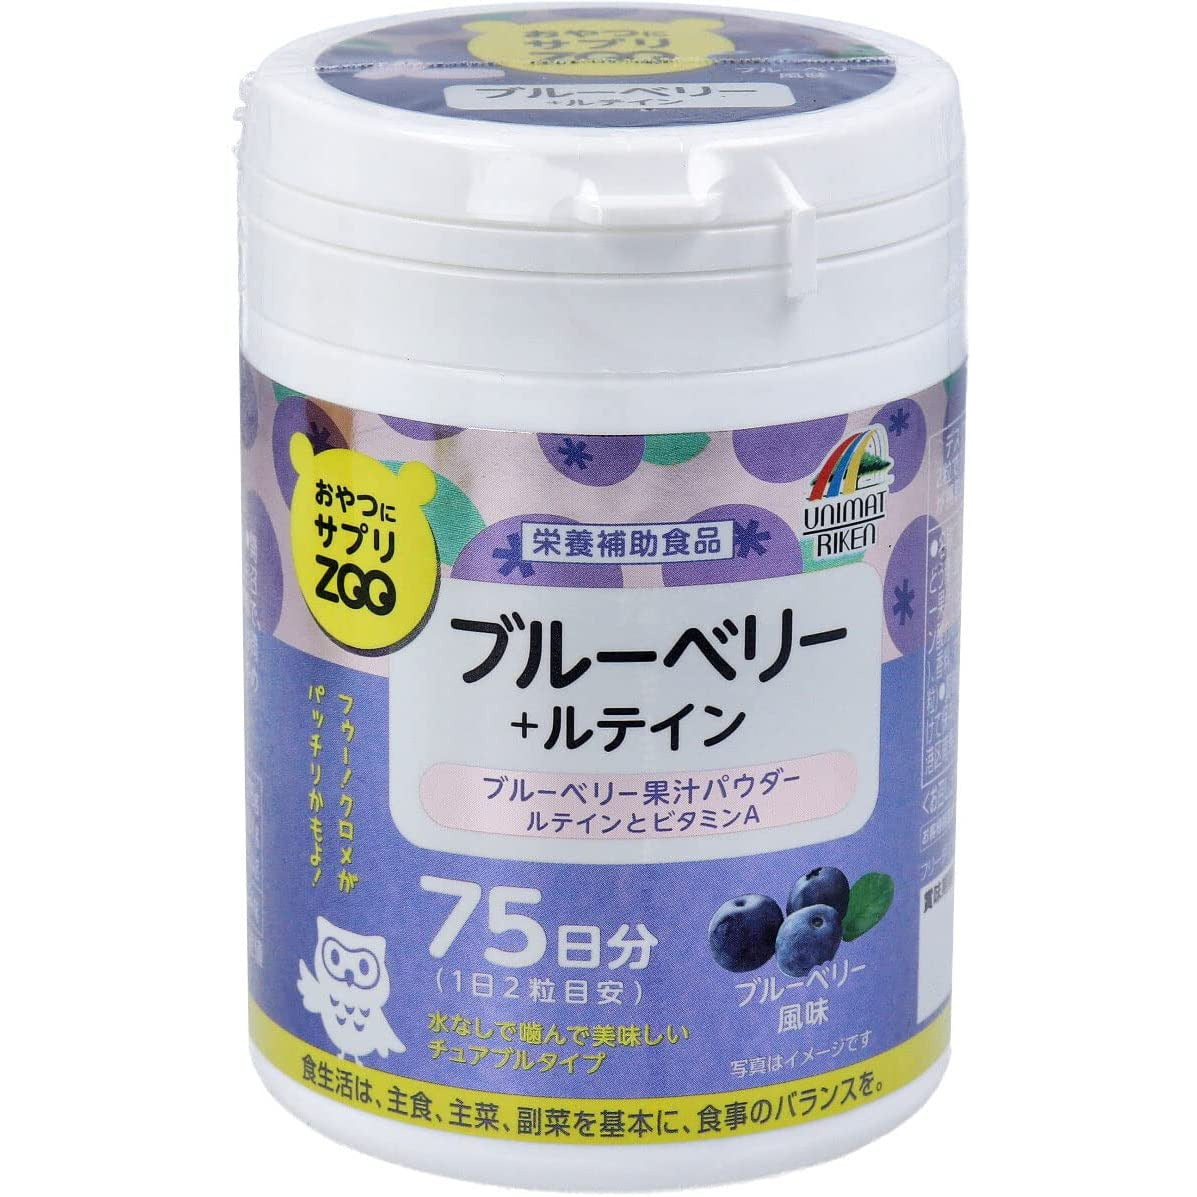 ZOO Blueberry + Lutein 150 Tablets 75days